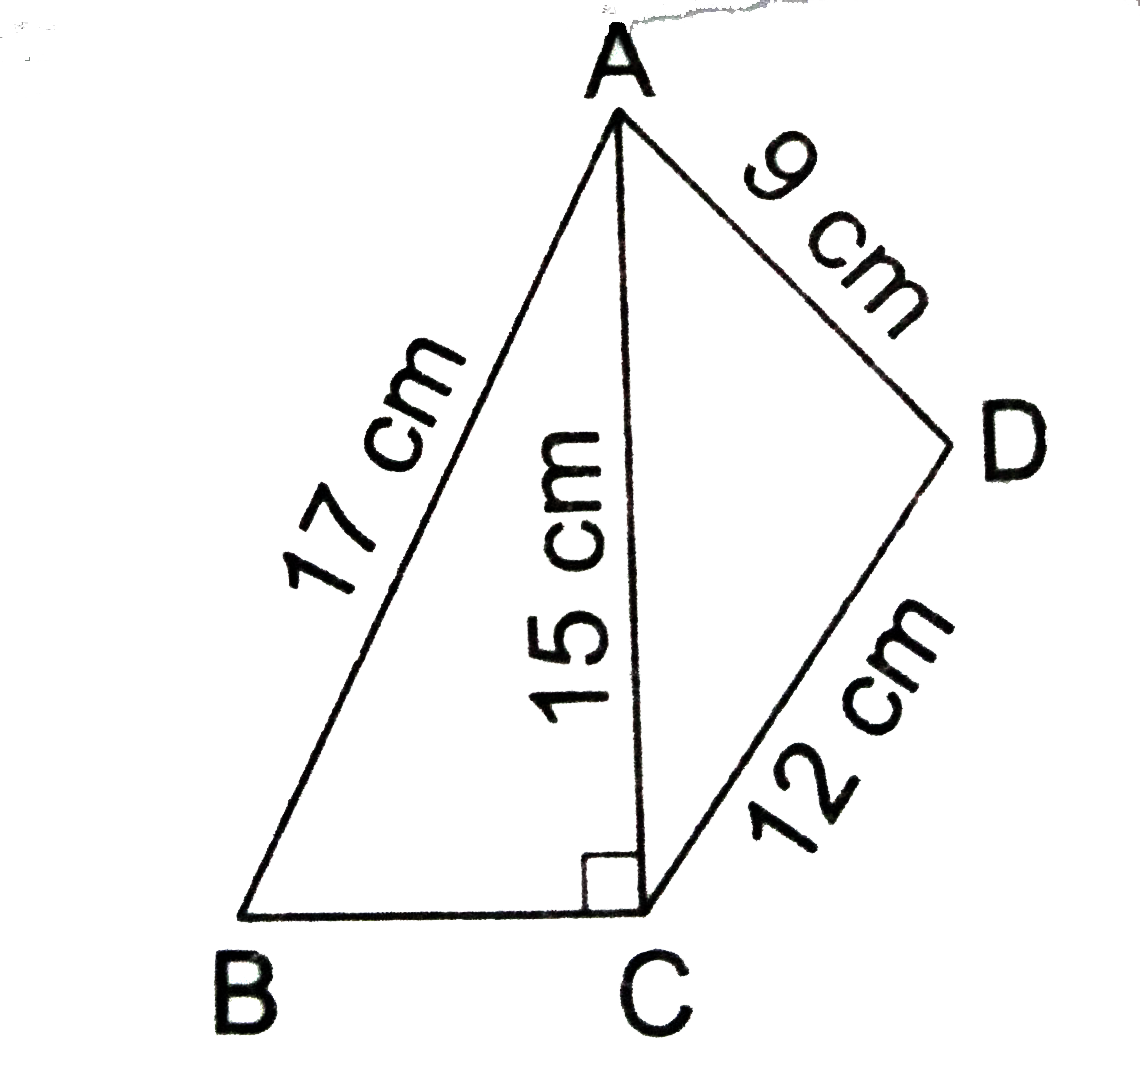 Find  the perimeter  and area of the  quadrilateral ABCD in  which  AB= 17 cm ,  AD= 9 cm, CD=12 cm angle AVB=90^(@) and  AC=15  cm.